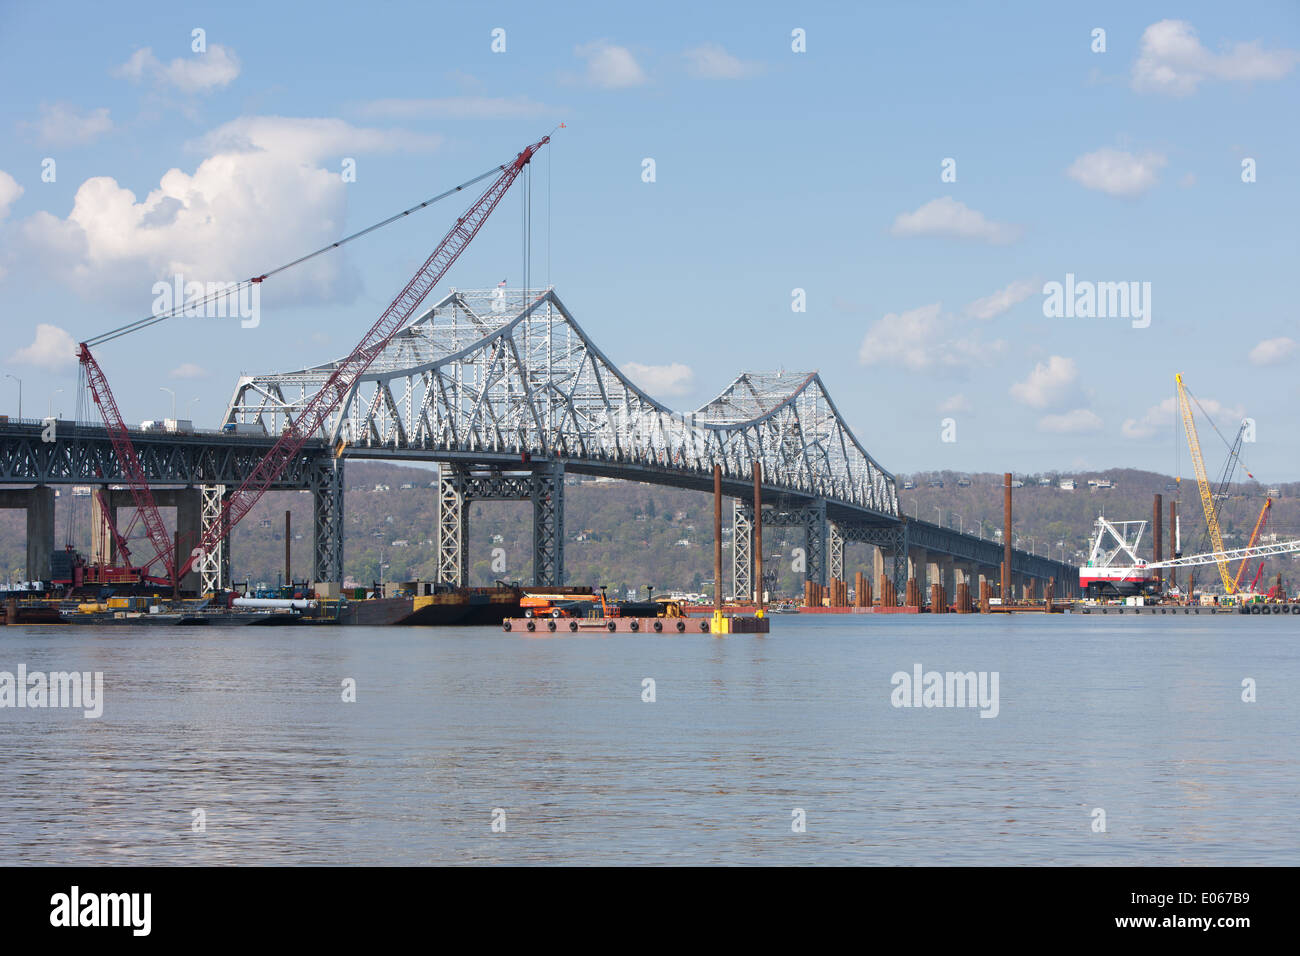 Barges and cranes under the Tappan Zee Bridge lay the pilings for the foundation of the new Tappan Zee Bridge. Stock Photo